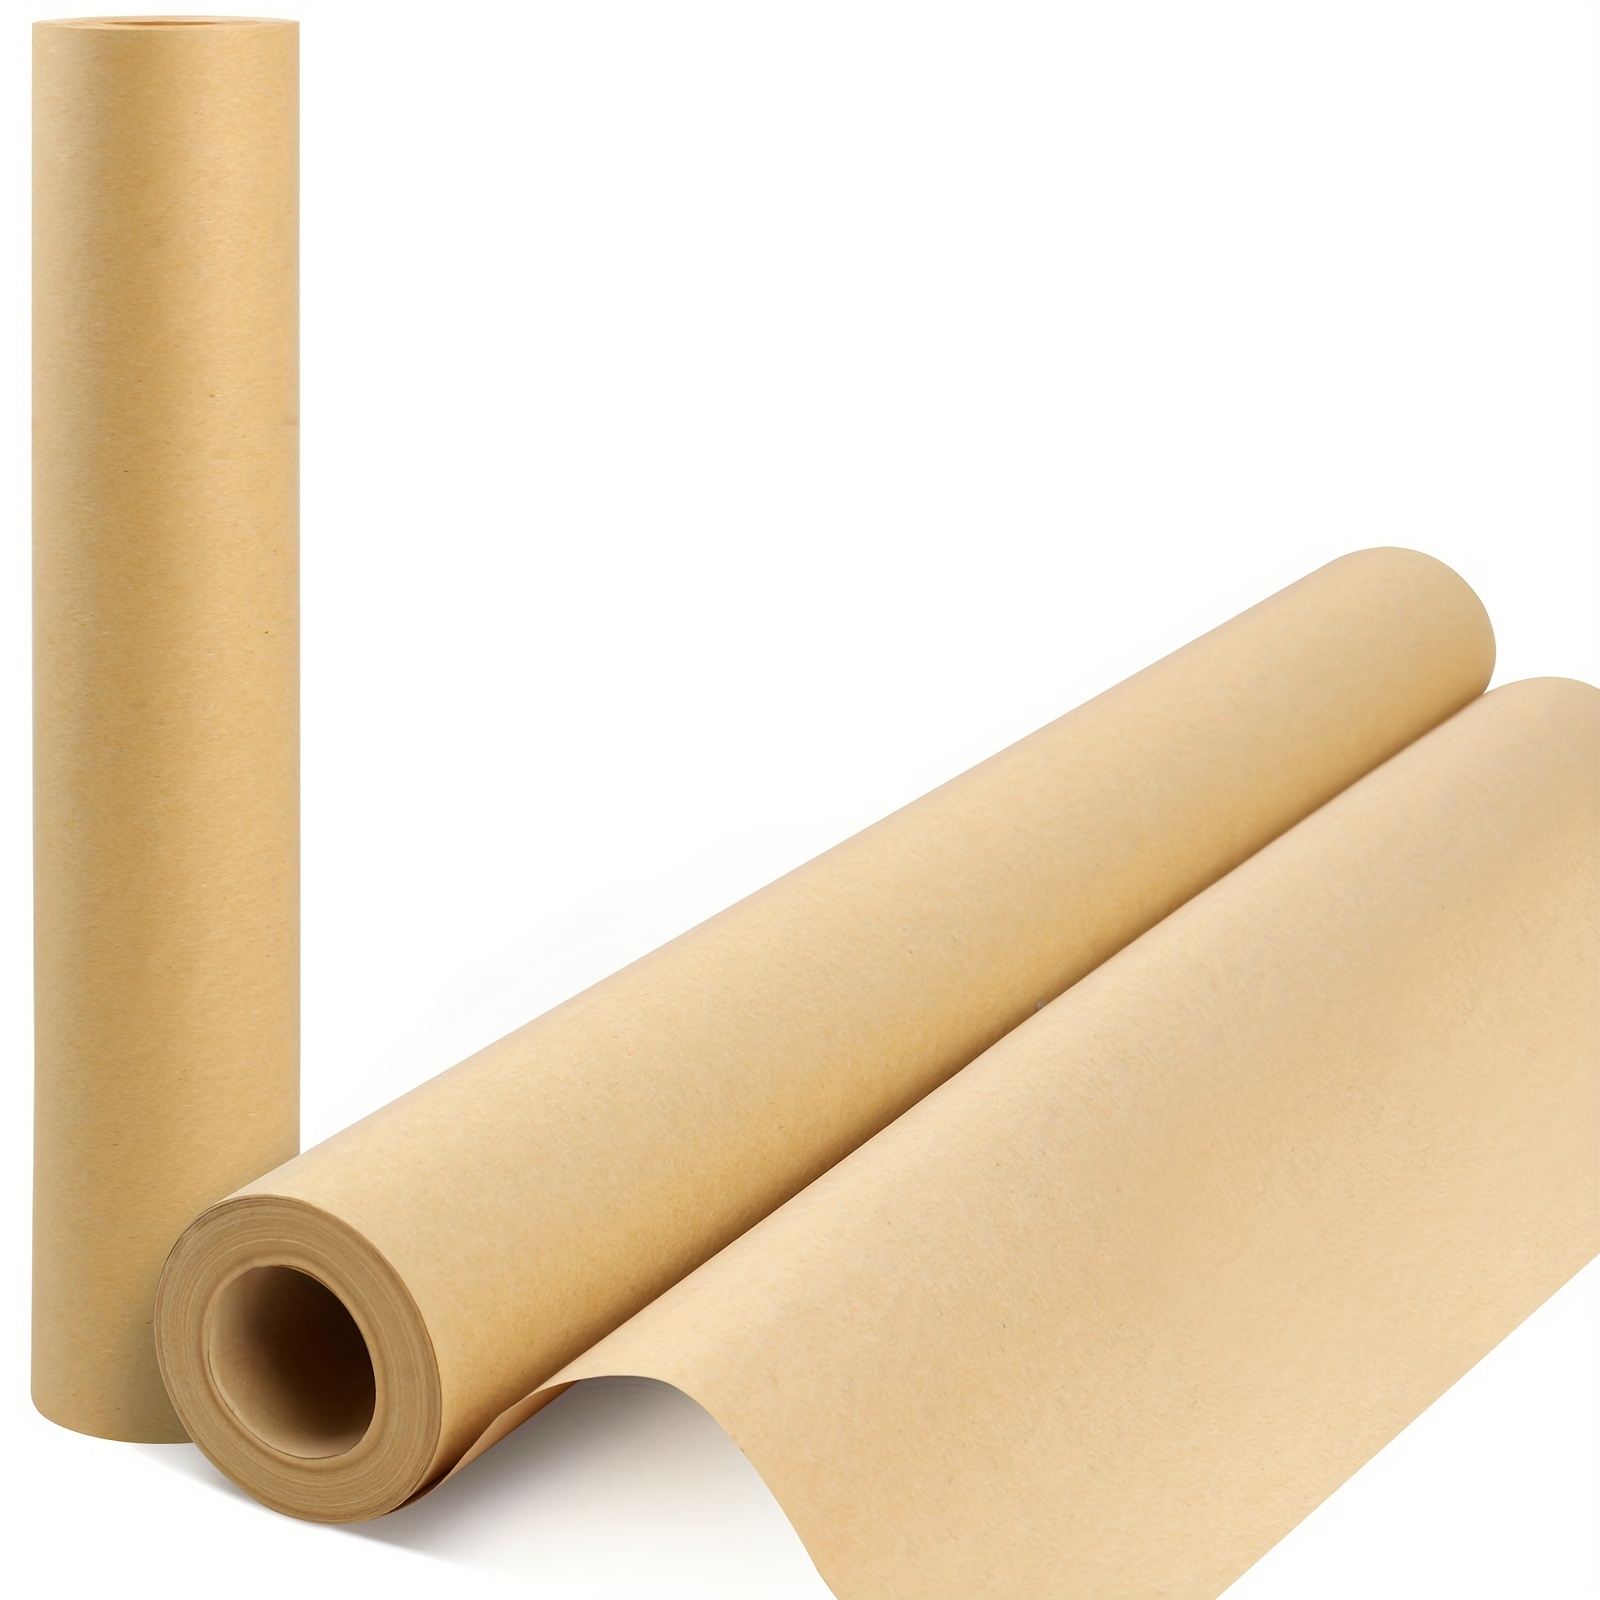 Brown Paepr Roll 15×400, Brown Wrapping Paper, Wrapping Paper, Craft  Paper, Packing Paper For Moving, Packing, Gift Wrapping, Wall Art, Table  Runner